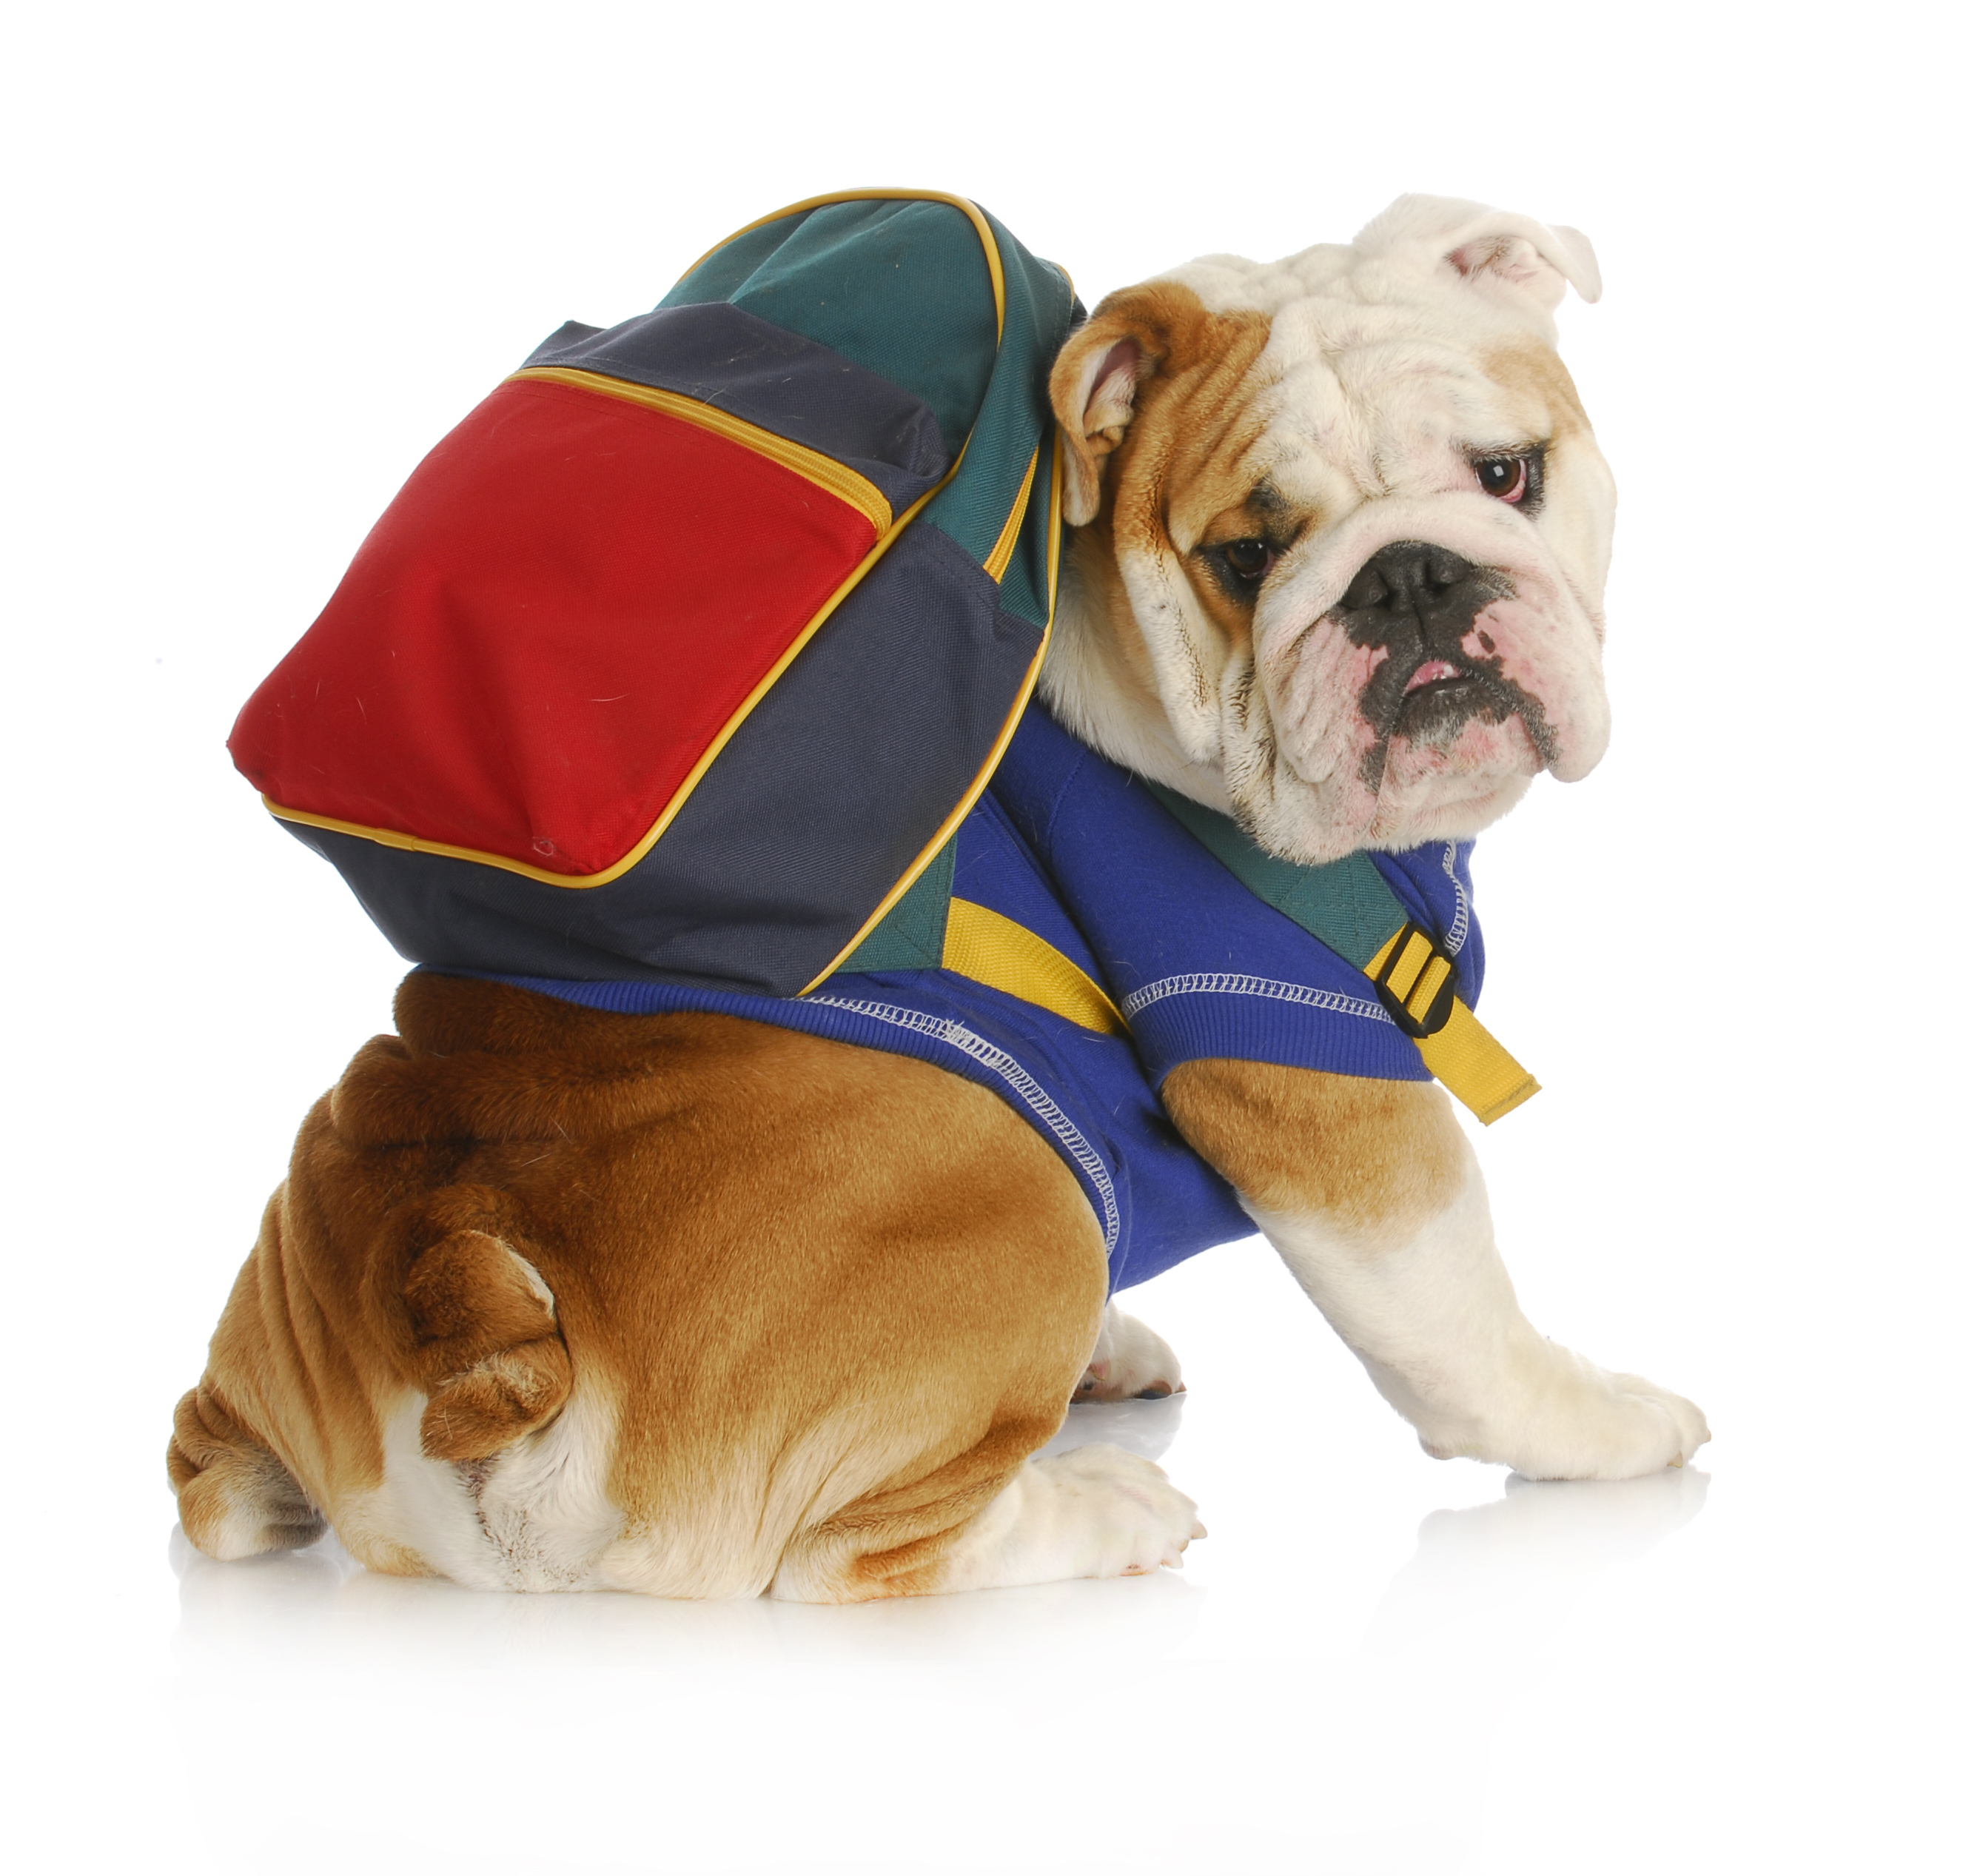 A white-and-brown bulldog wears a blue t-shirt and a red-and-blue backpack.